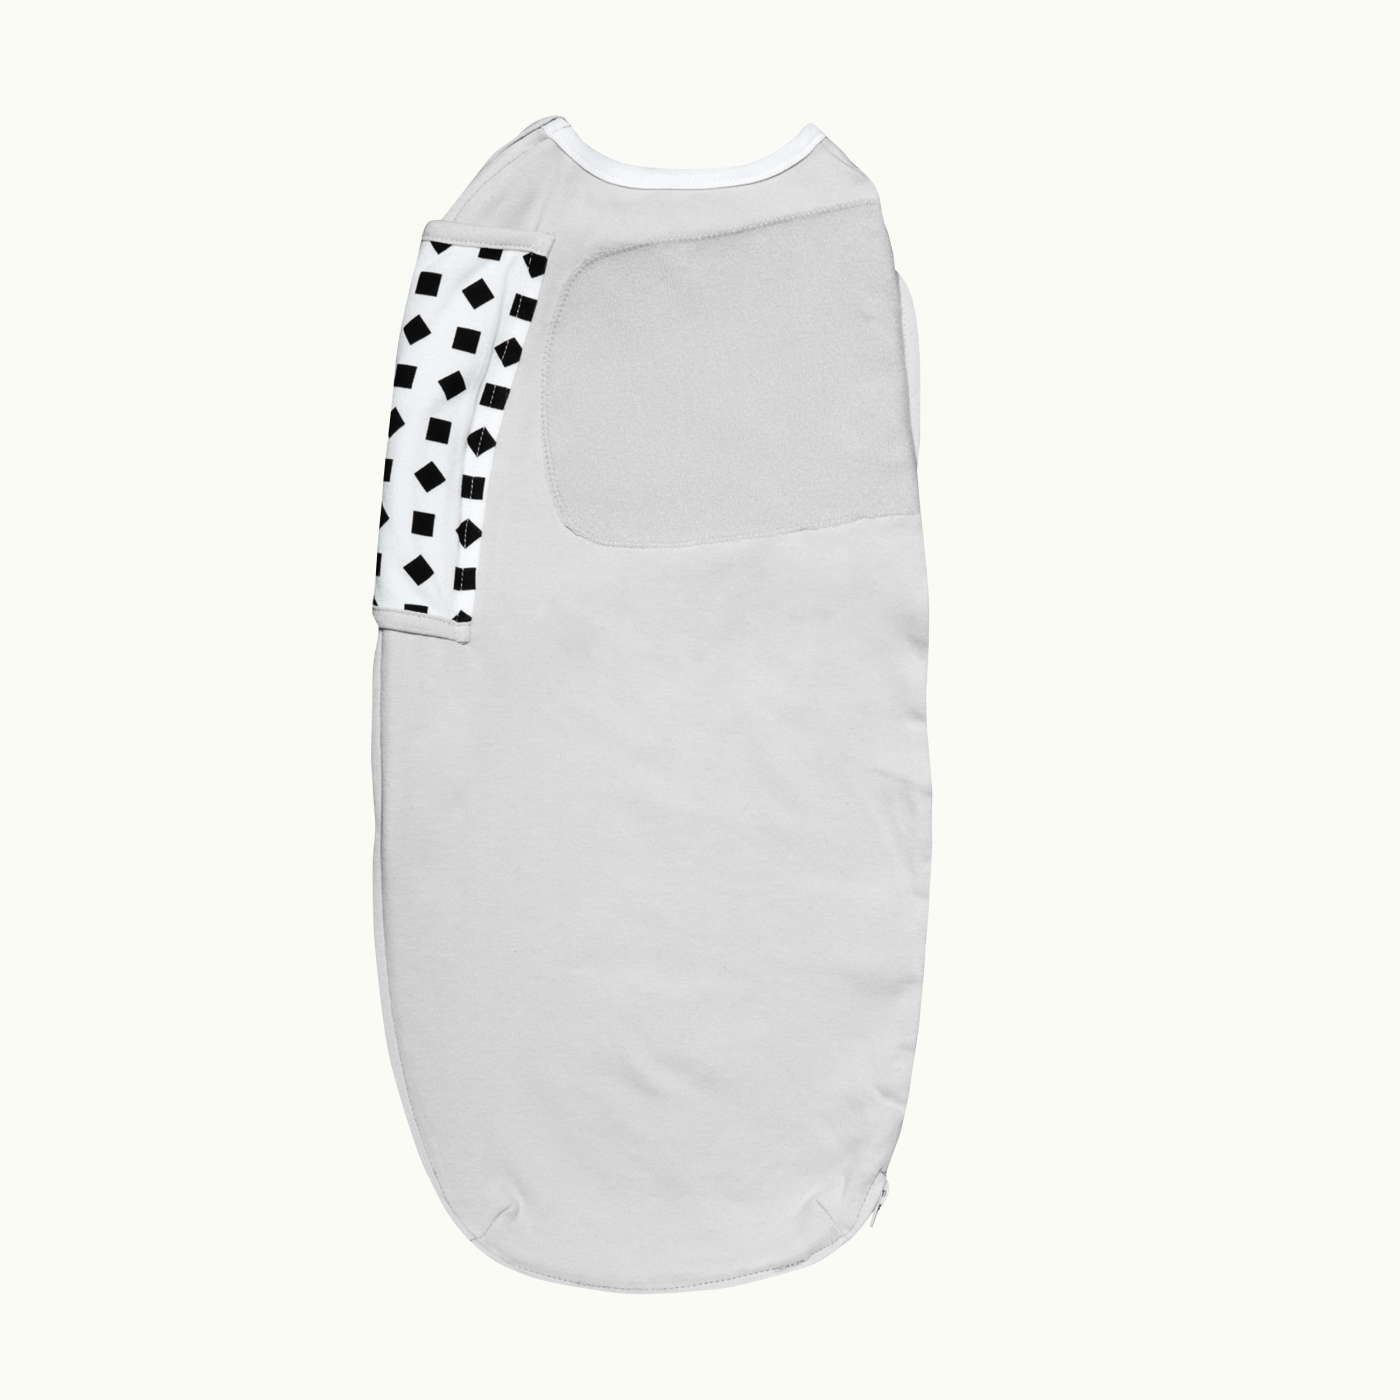 back side of nanit swaddle in gray